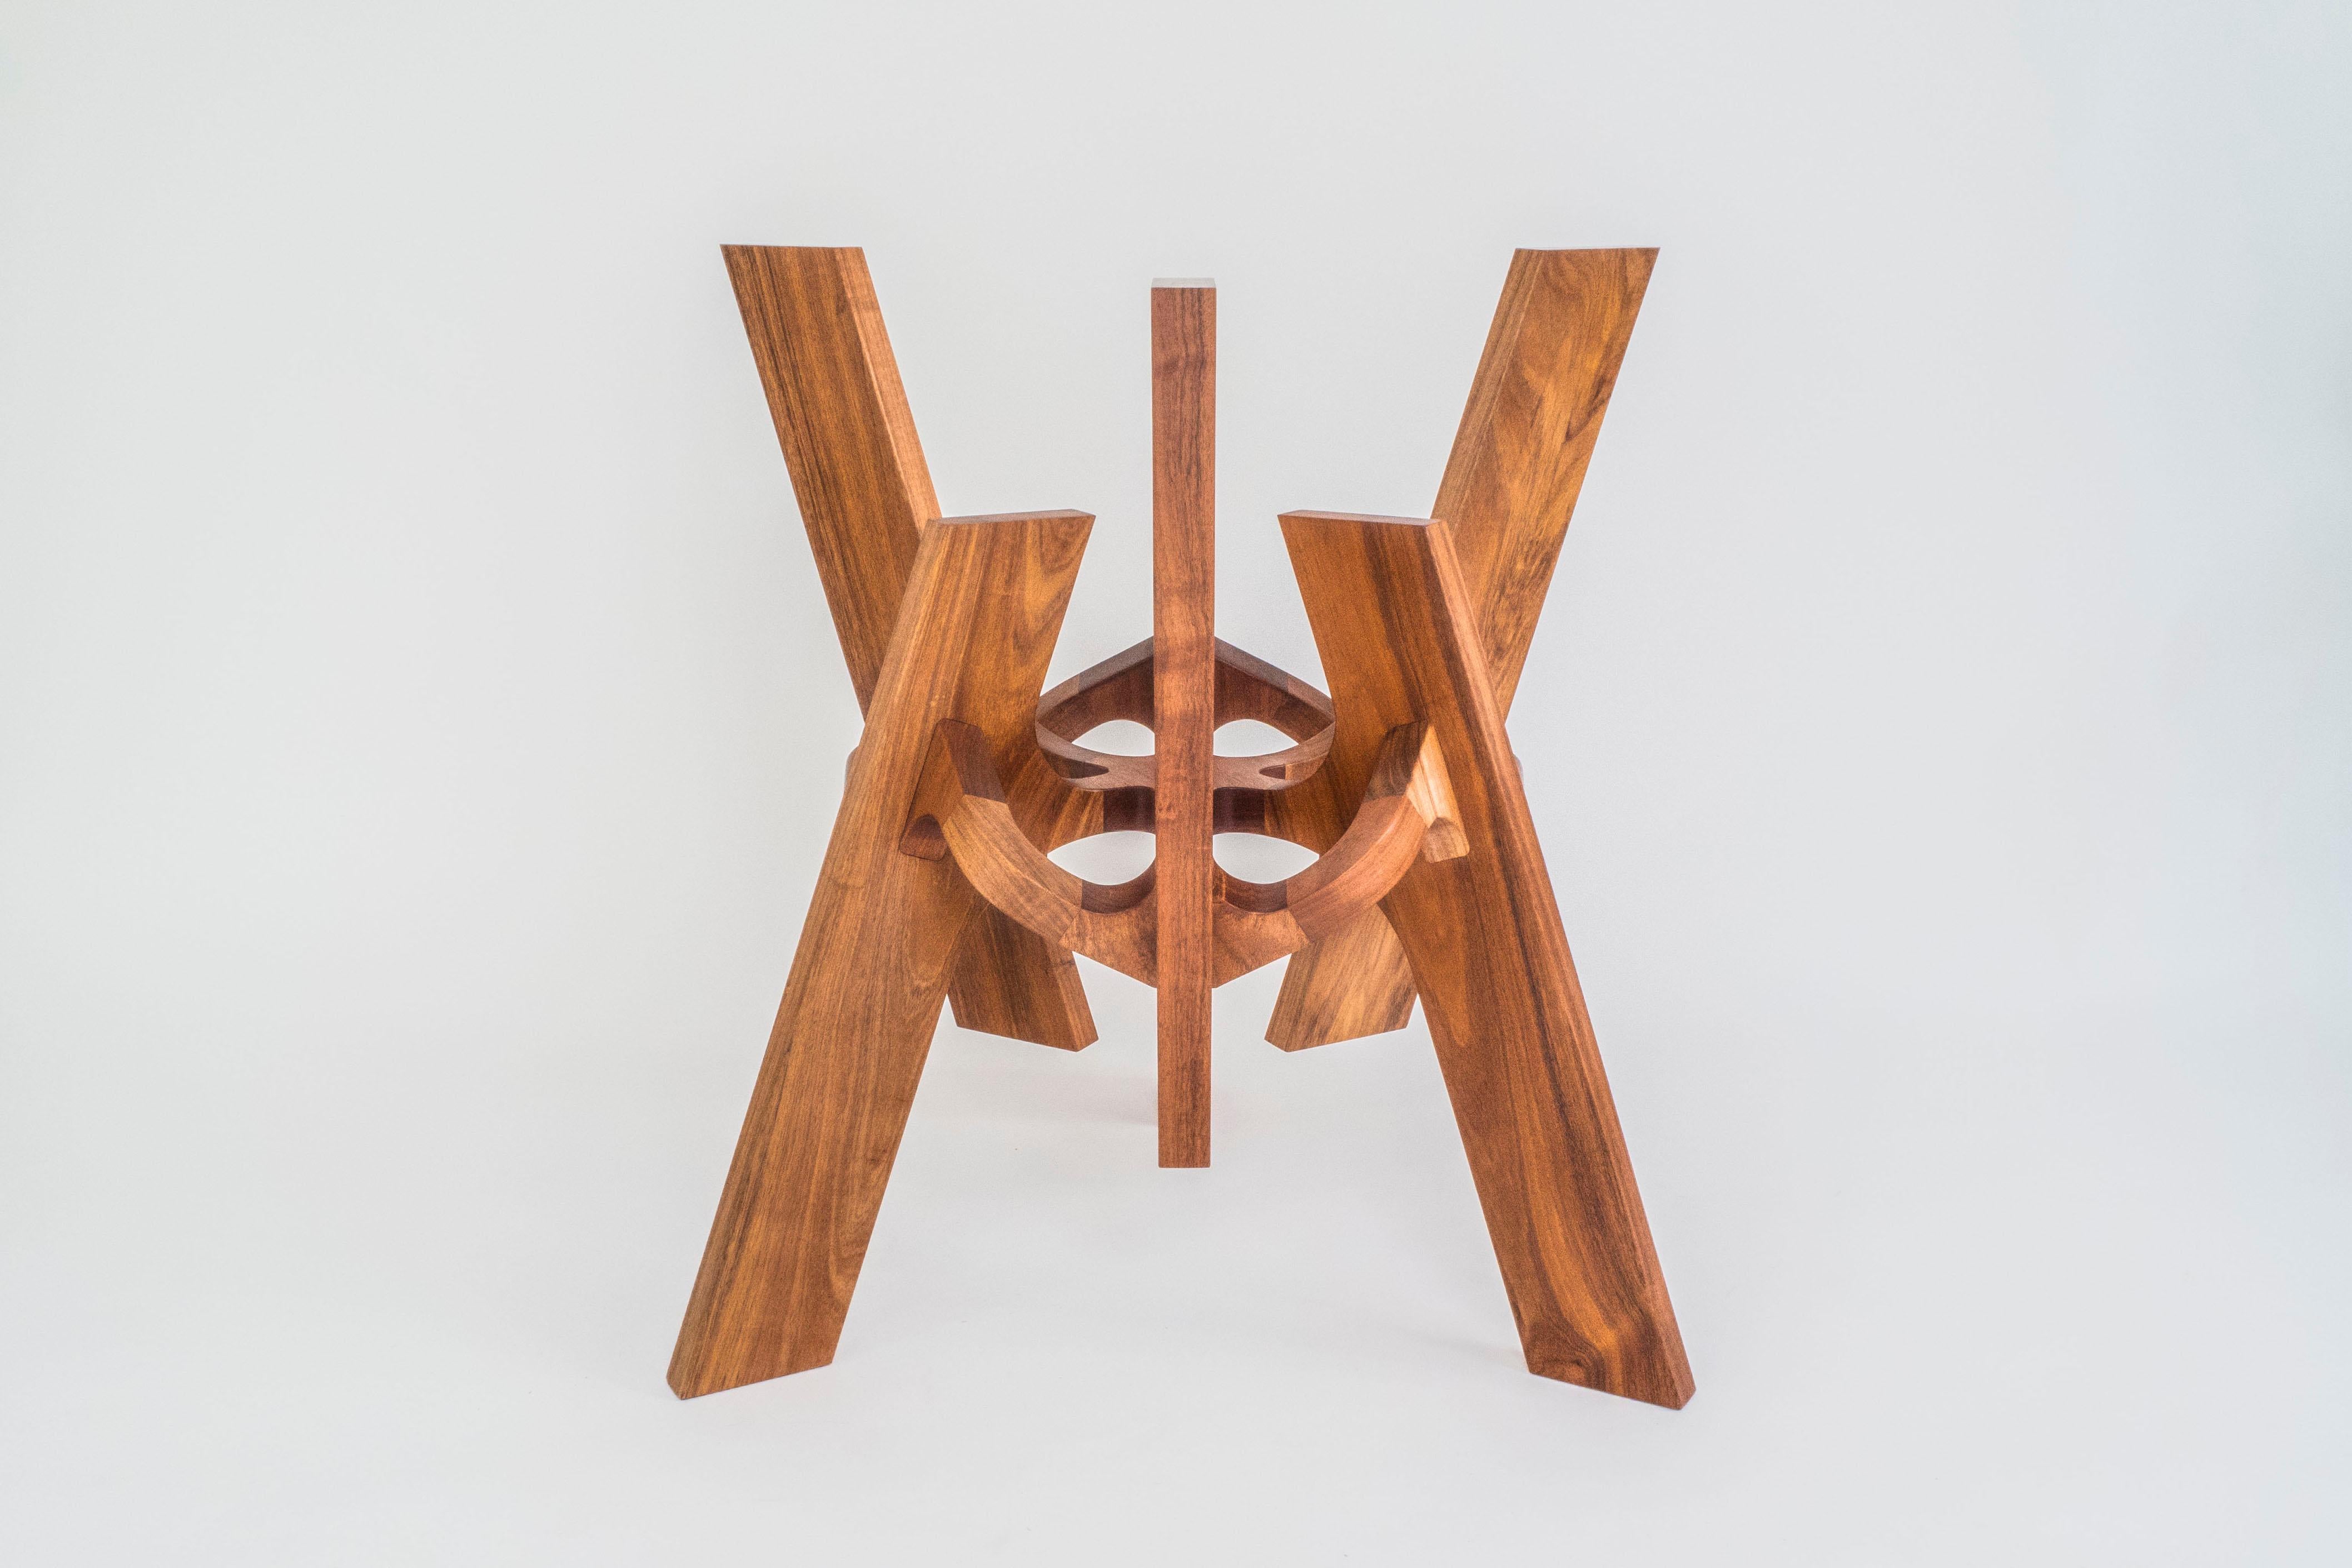 Astra, Geometric Sculptural Center Table Made of Solid Wood by Pedro Cerisola For Sale 2